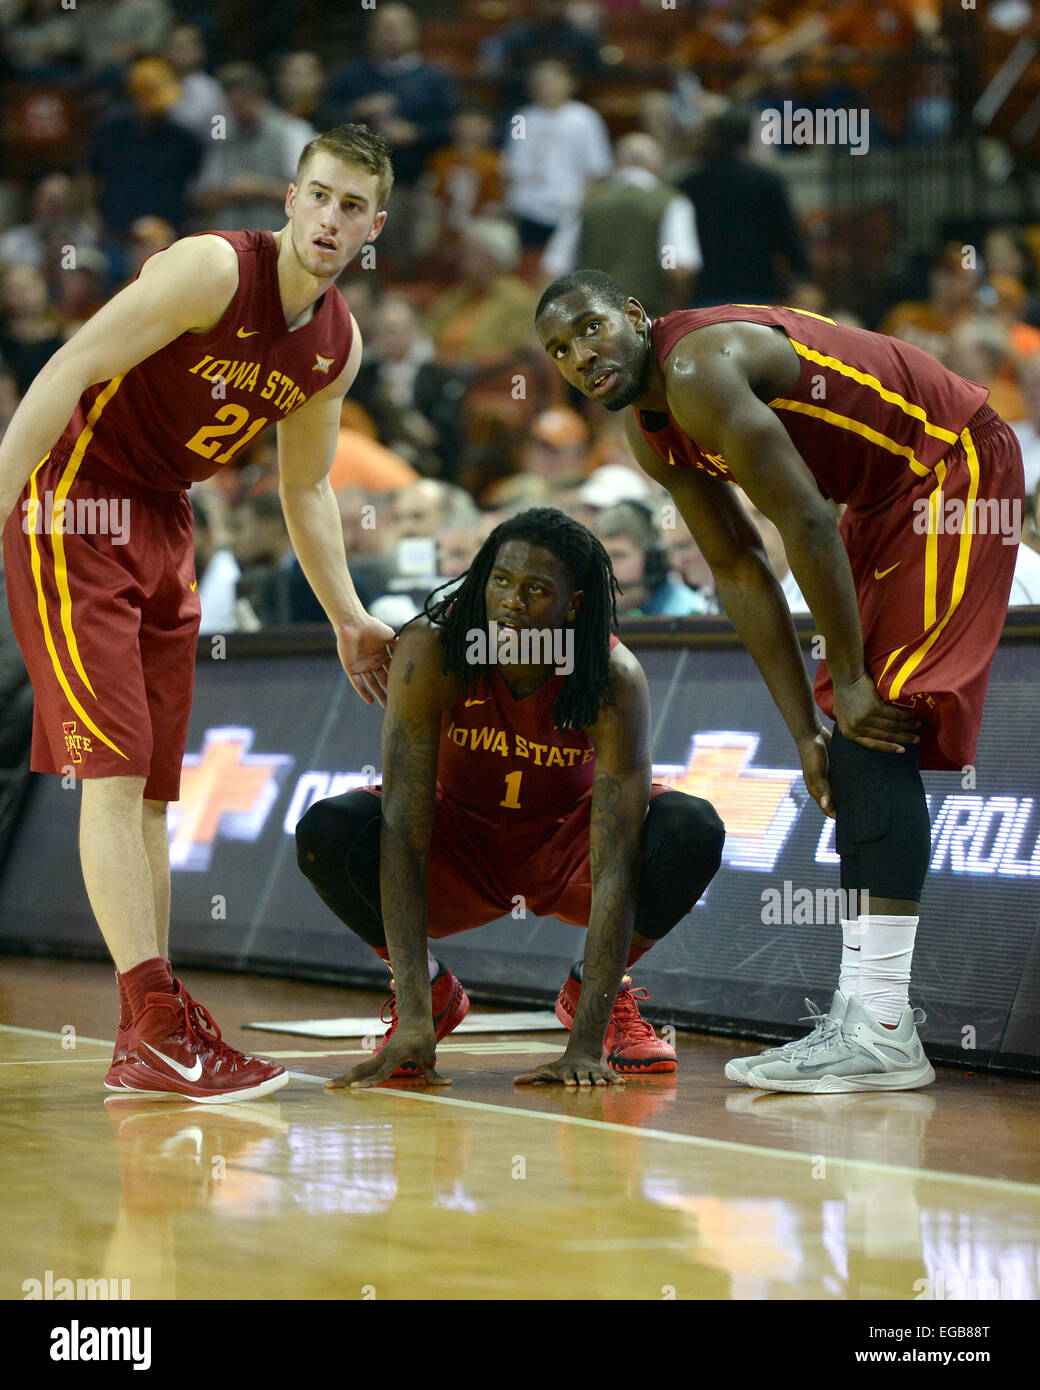 Feb 21, 2015. Dustin Hogue #22, Matt Thomas #21 and Jameel McKay #1 of the Iowa State Cyclones in action vs the Texas Longhorns at the Frank Erwin Center in Austin Texas. Iowa State defeats the Longhorns 85-77. Stock Photo